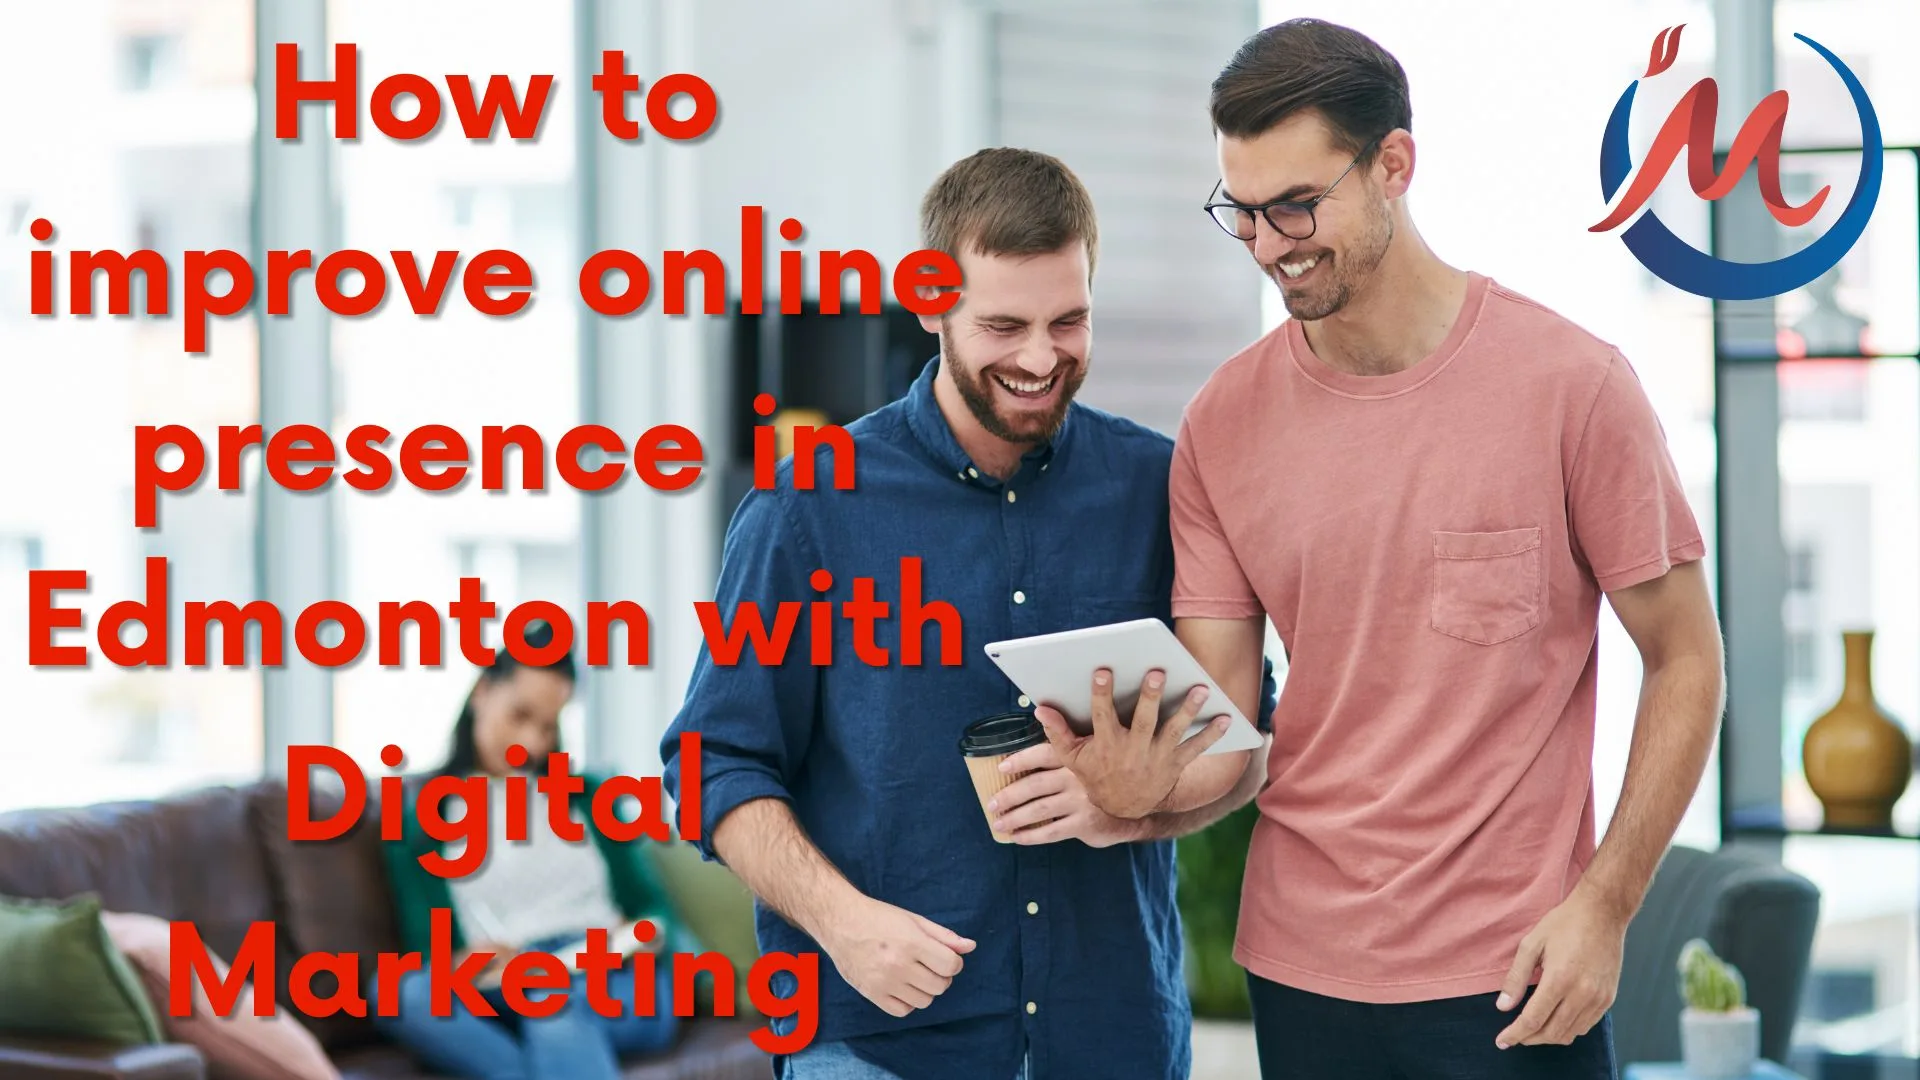 How to improve online presence in Edmonton with digital marketing